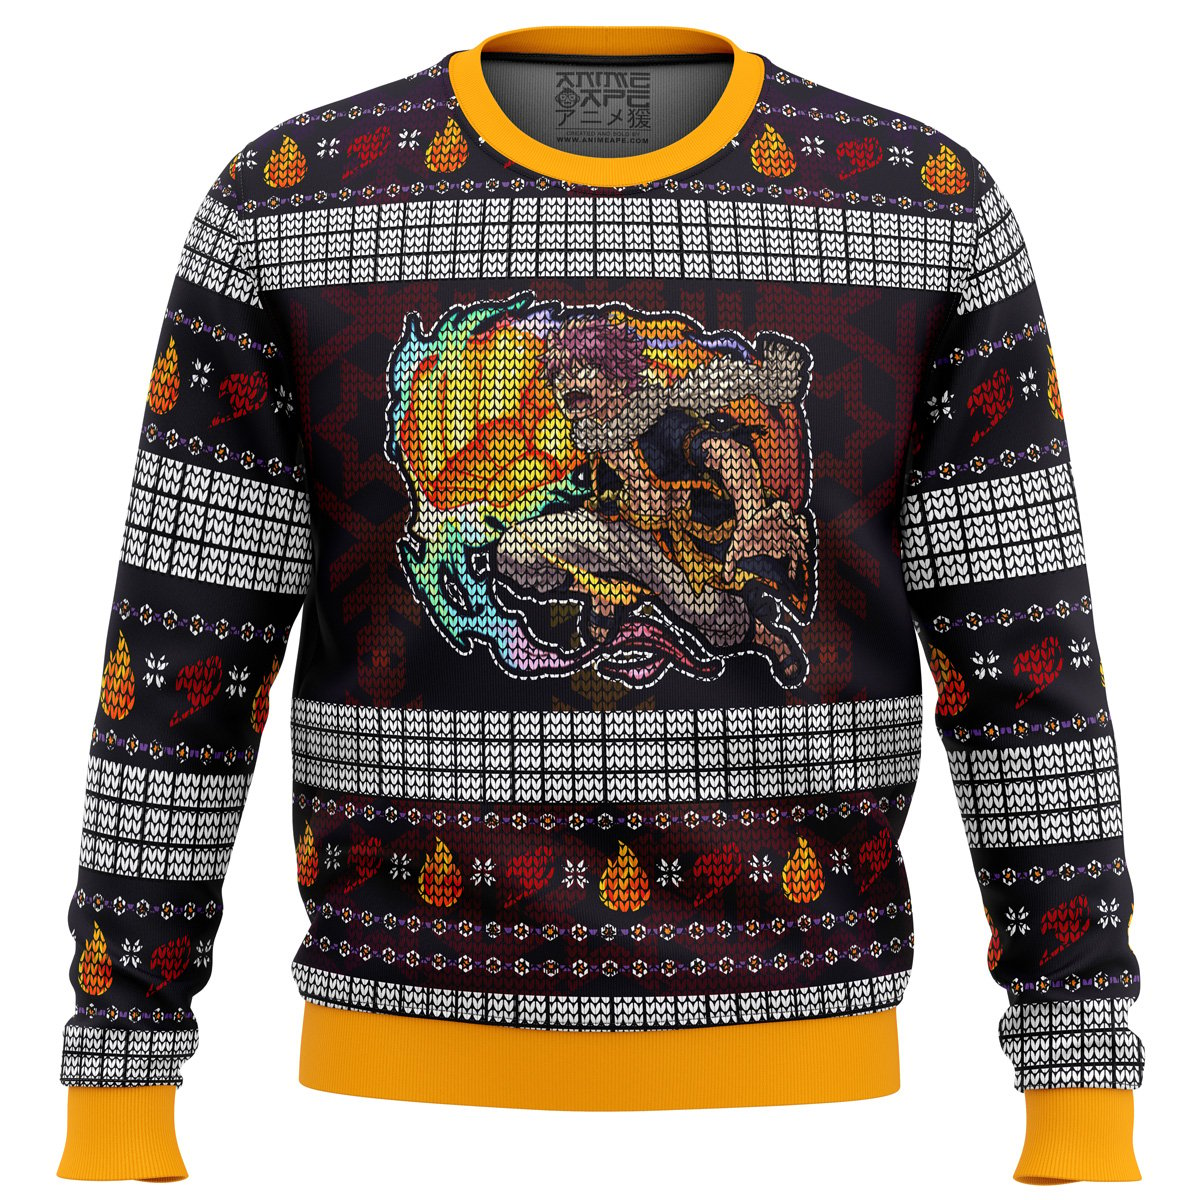 Fire Dragon's Iron Fist Dragneel Natsu Fairy Tail Ugly Christmas Sweater